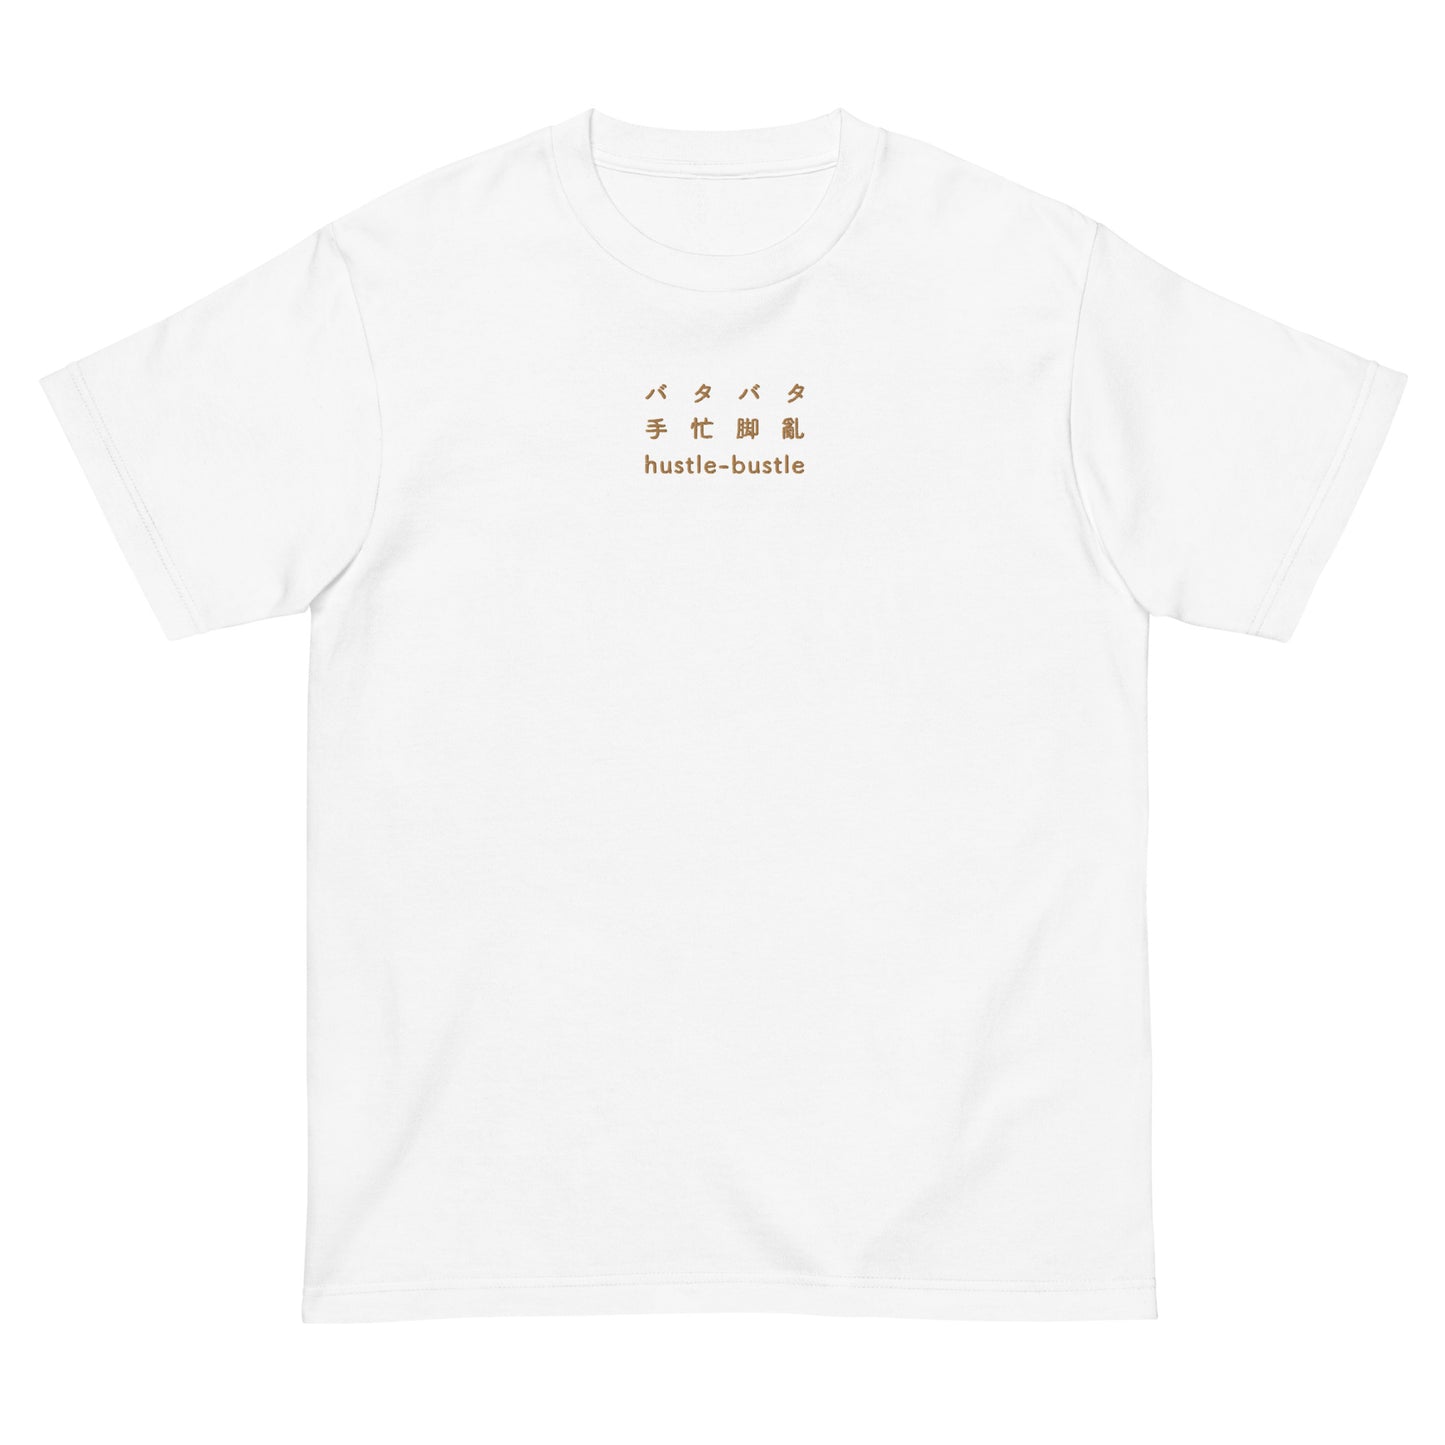 White High Quality Tee - Front Design with an Brown Embroidery "Hustle-Bustle" in Japanese, Chinese and English